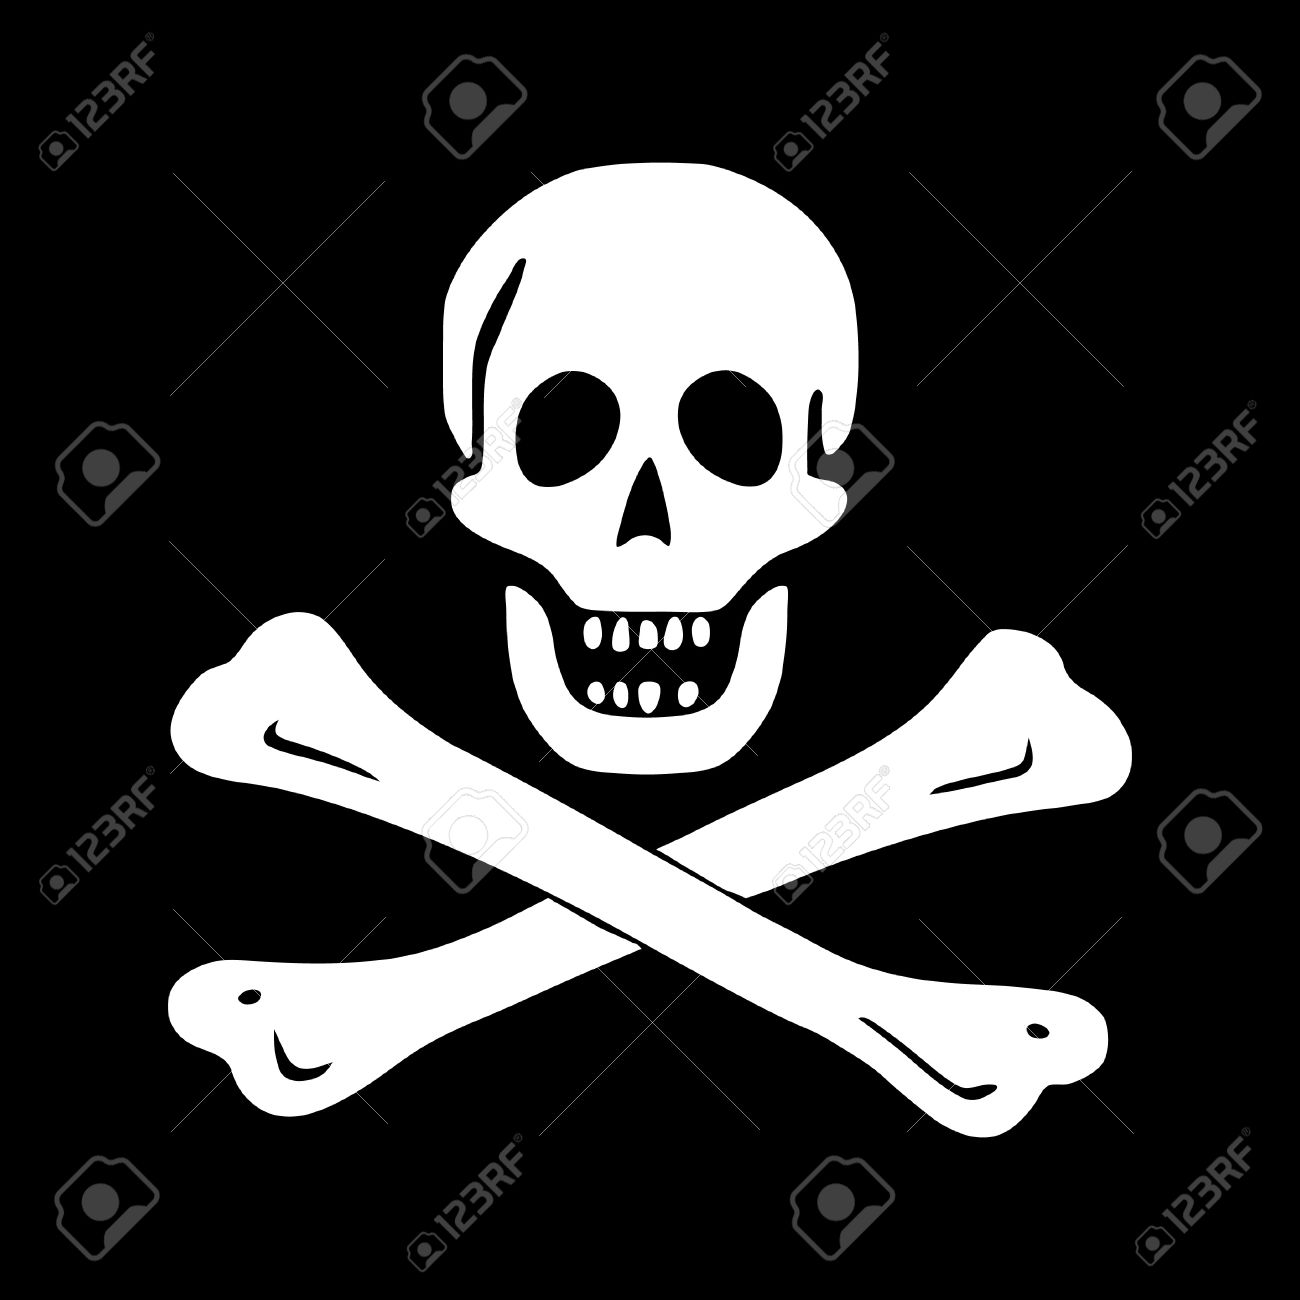 Jolly Roger clipart #13, Download drawings